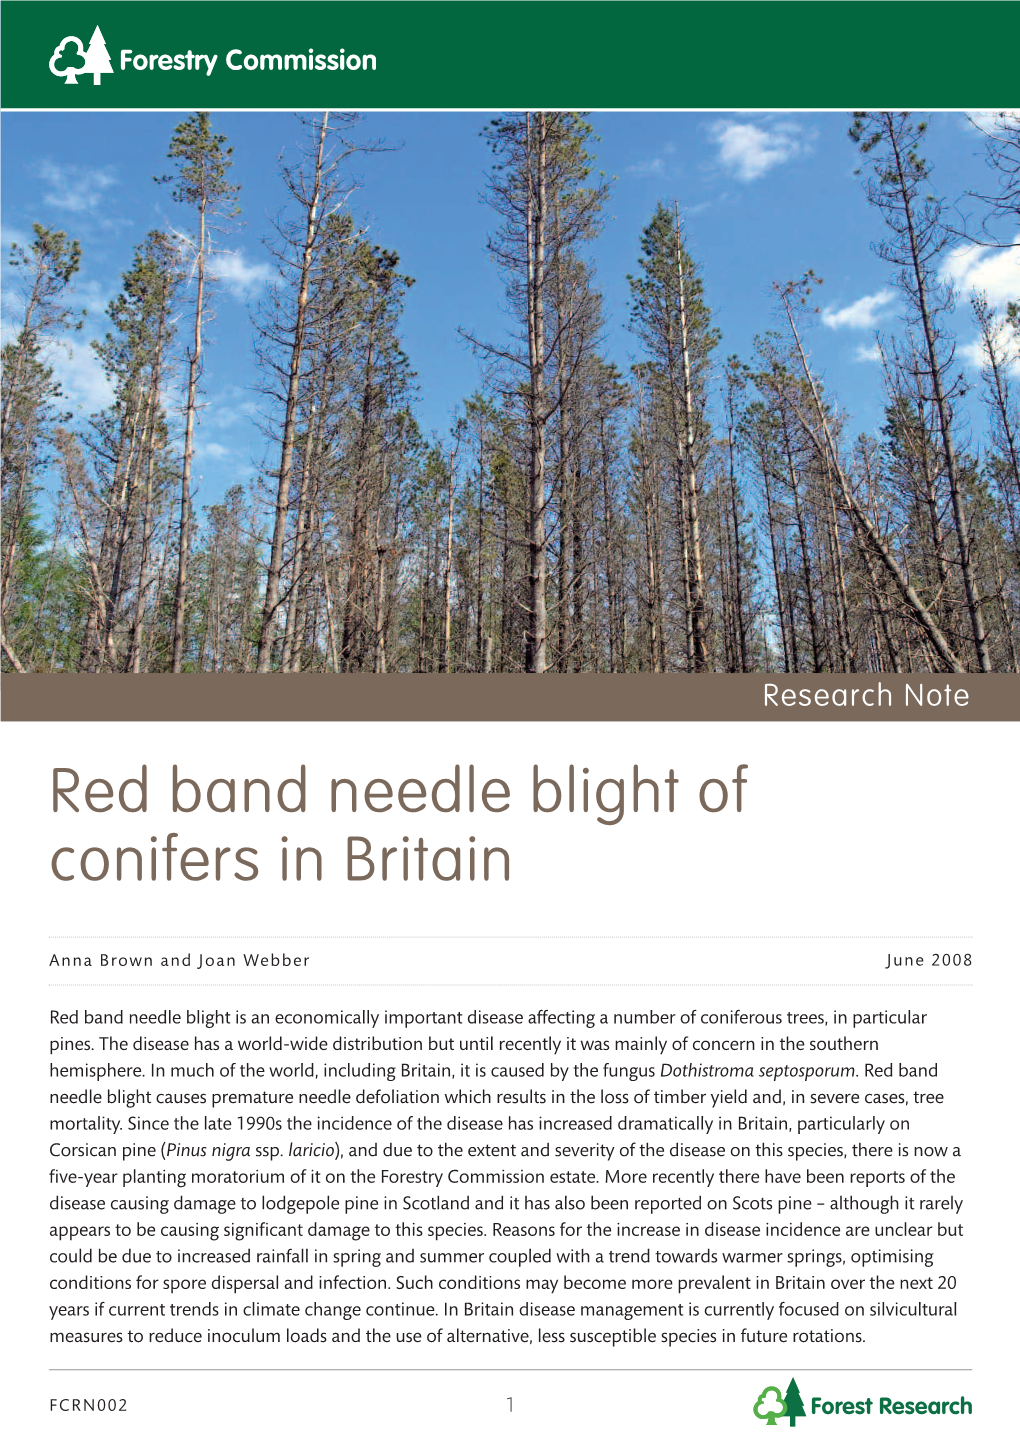 Red Band Needle Blight of Conifers in Britain